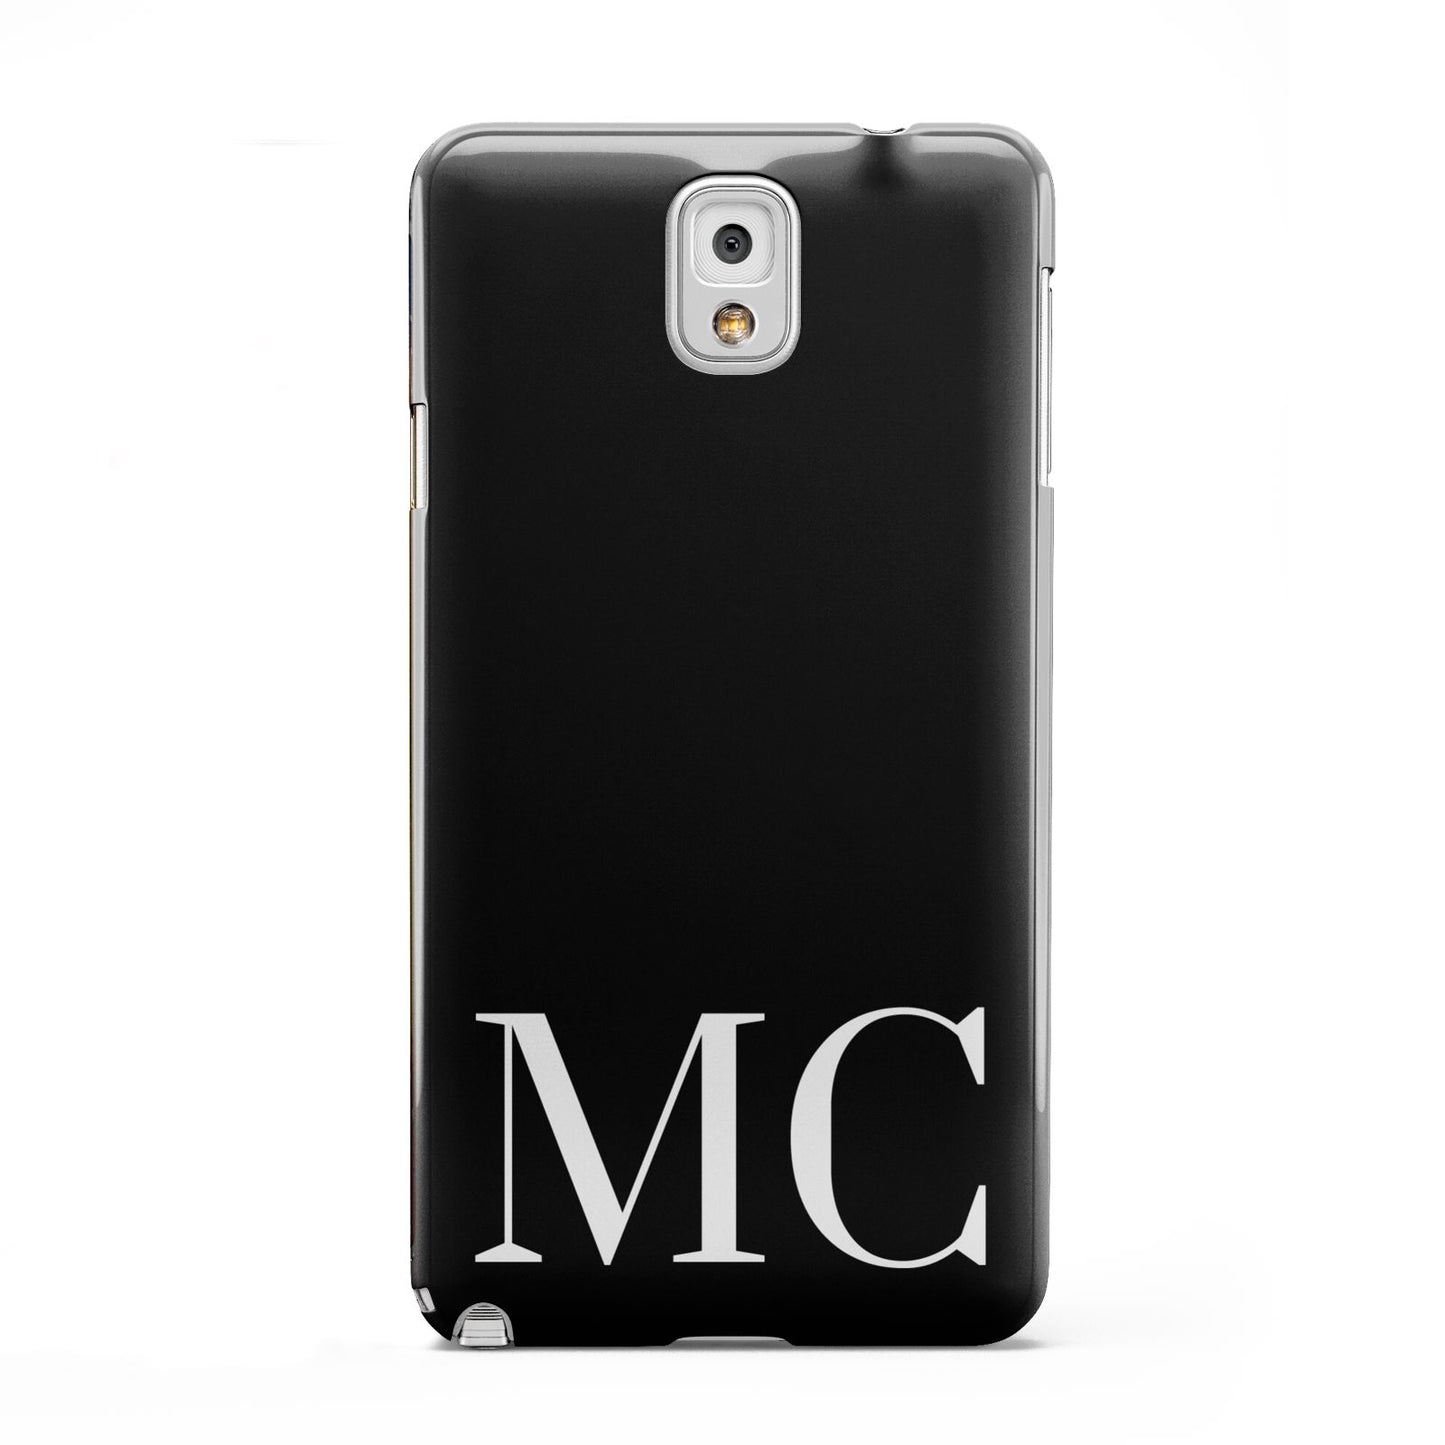 Initials Personalised 1 Samsung Galaxy Note 3 Case